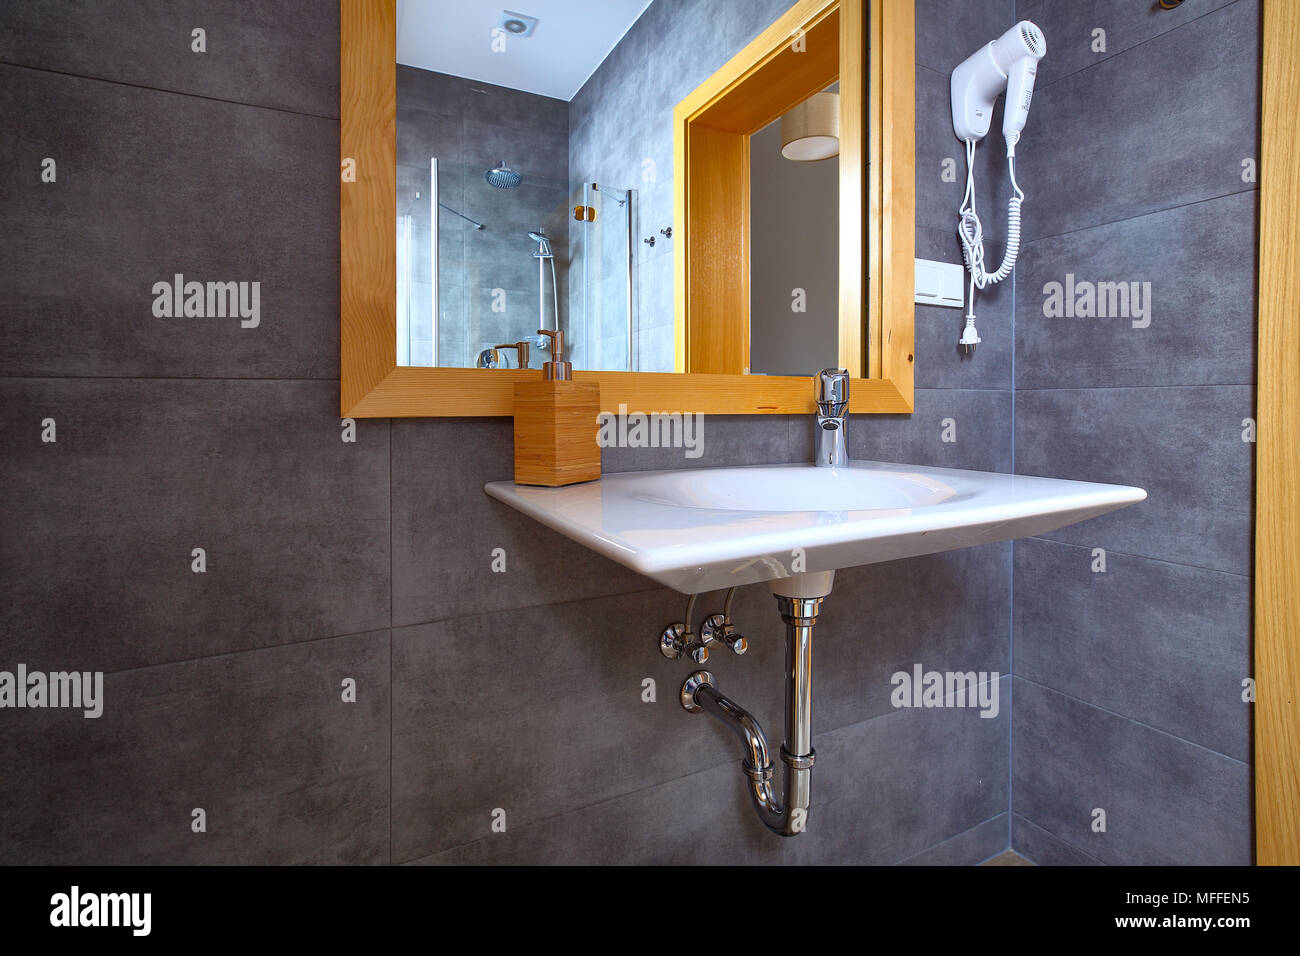 White shiny sink with mirror in bathroom with gray tile on walls. Interior of modern bath. Stock Photo